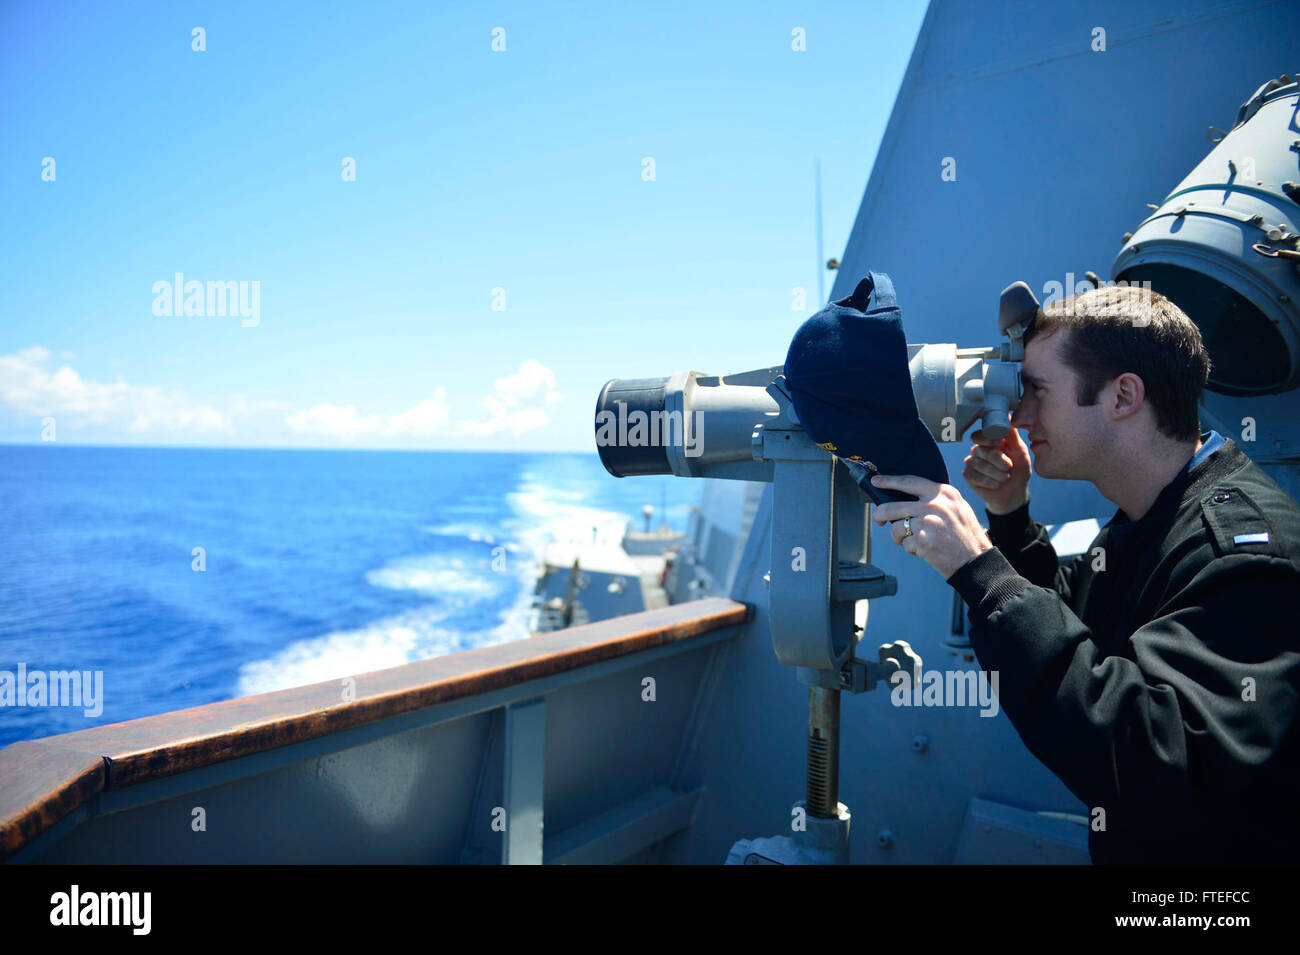 140709-N-AT101-088 ATLANTIC OCEAN (July 9, 2014) – Lt.j.g. Michael Pounders, assigned to the guided-missile destroyer USS Nitze (DDG 94), uses the ship-mounted binoculars to look for contacts in the distance while standing a navigation watch on the bridge wing. Nitze, homeported in Norfolk, Va., is conducting naval operations in support of U.S. national security interests in the U.S. 6th Fleet area of operations. (U.S. Navy photo by Mass Communication Specialist 1st Class Maddelin Angebrand) Stock Photo